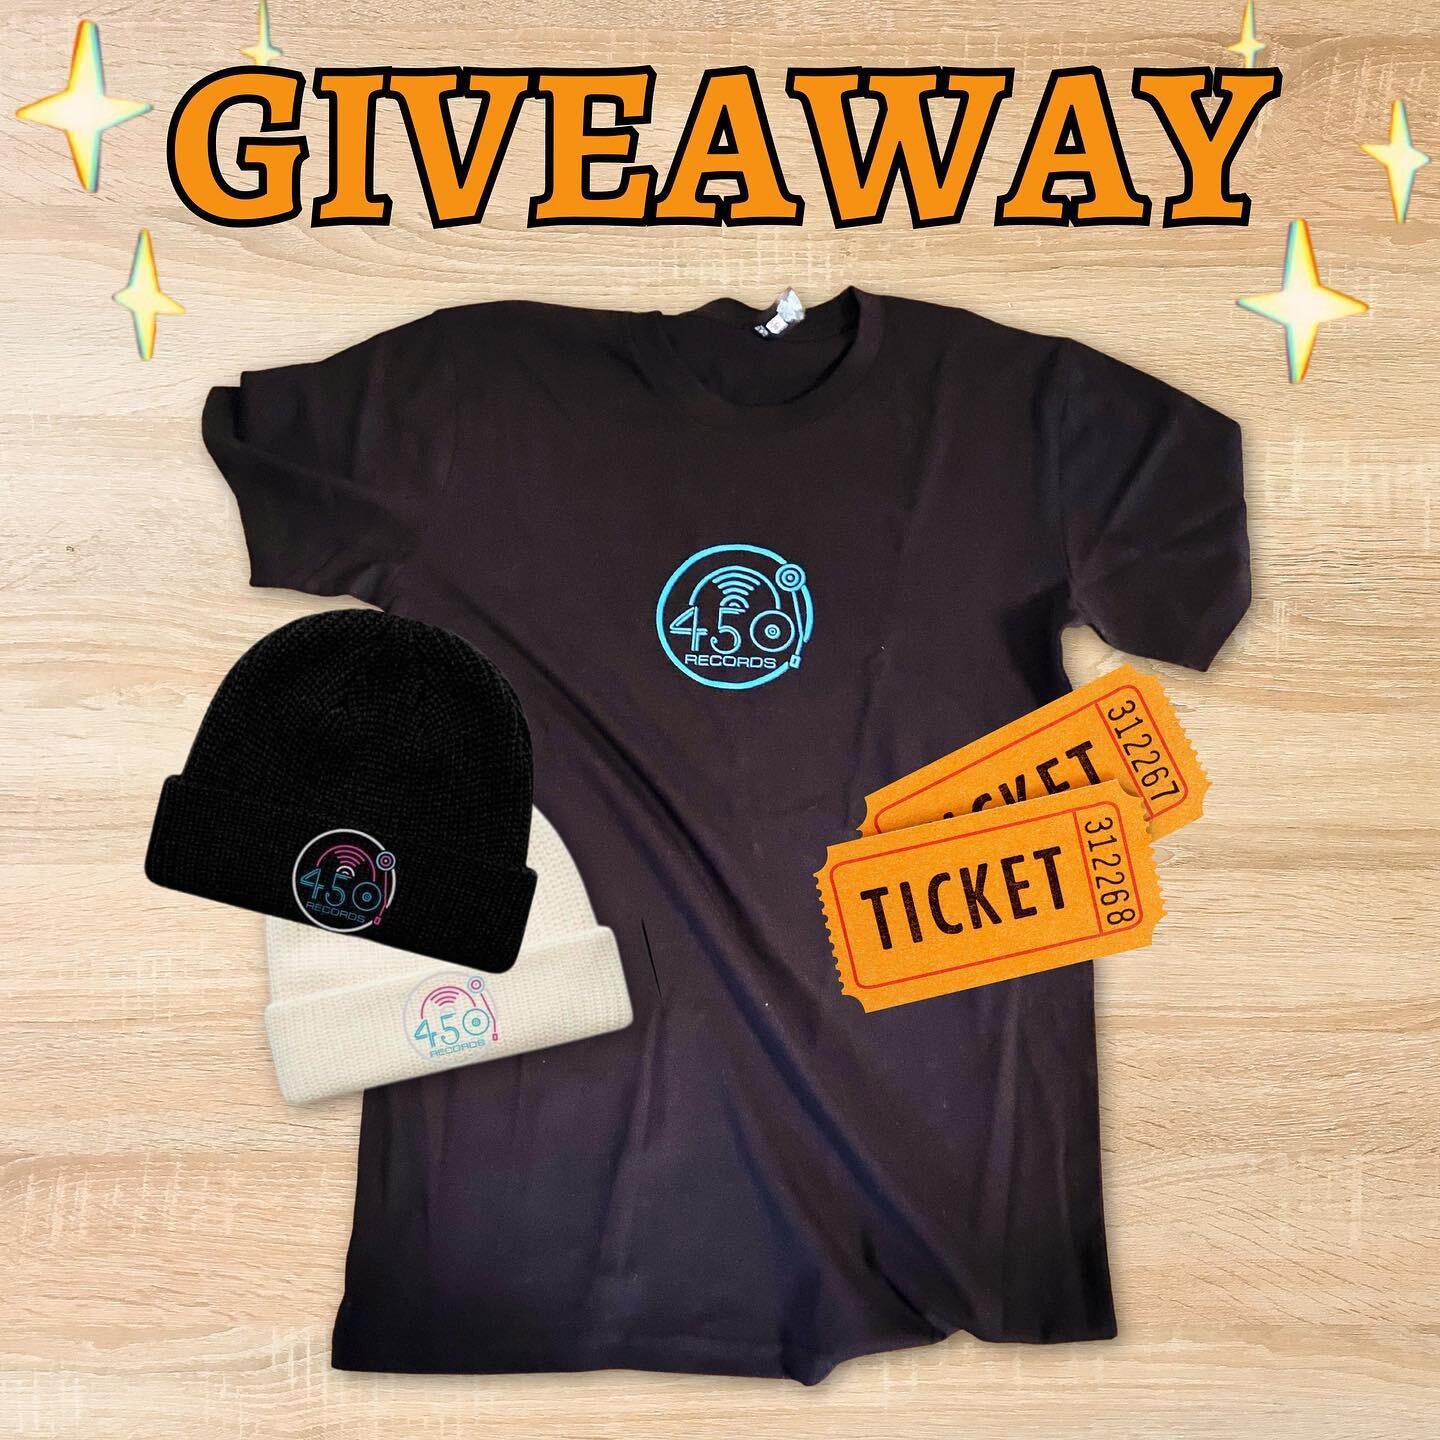 It&rsquo;s ✨GIVEAWAY✨ TIME! ✨

In celebration of our launch events, we want to give back to our supportive community! We are giving away TWO tickets to 450 FEST 2 for this Monday night, as well as TWO merch items of the winner&rsquo;s choice! 🤩🎫

H